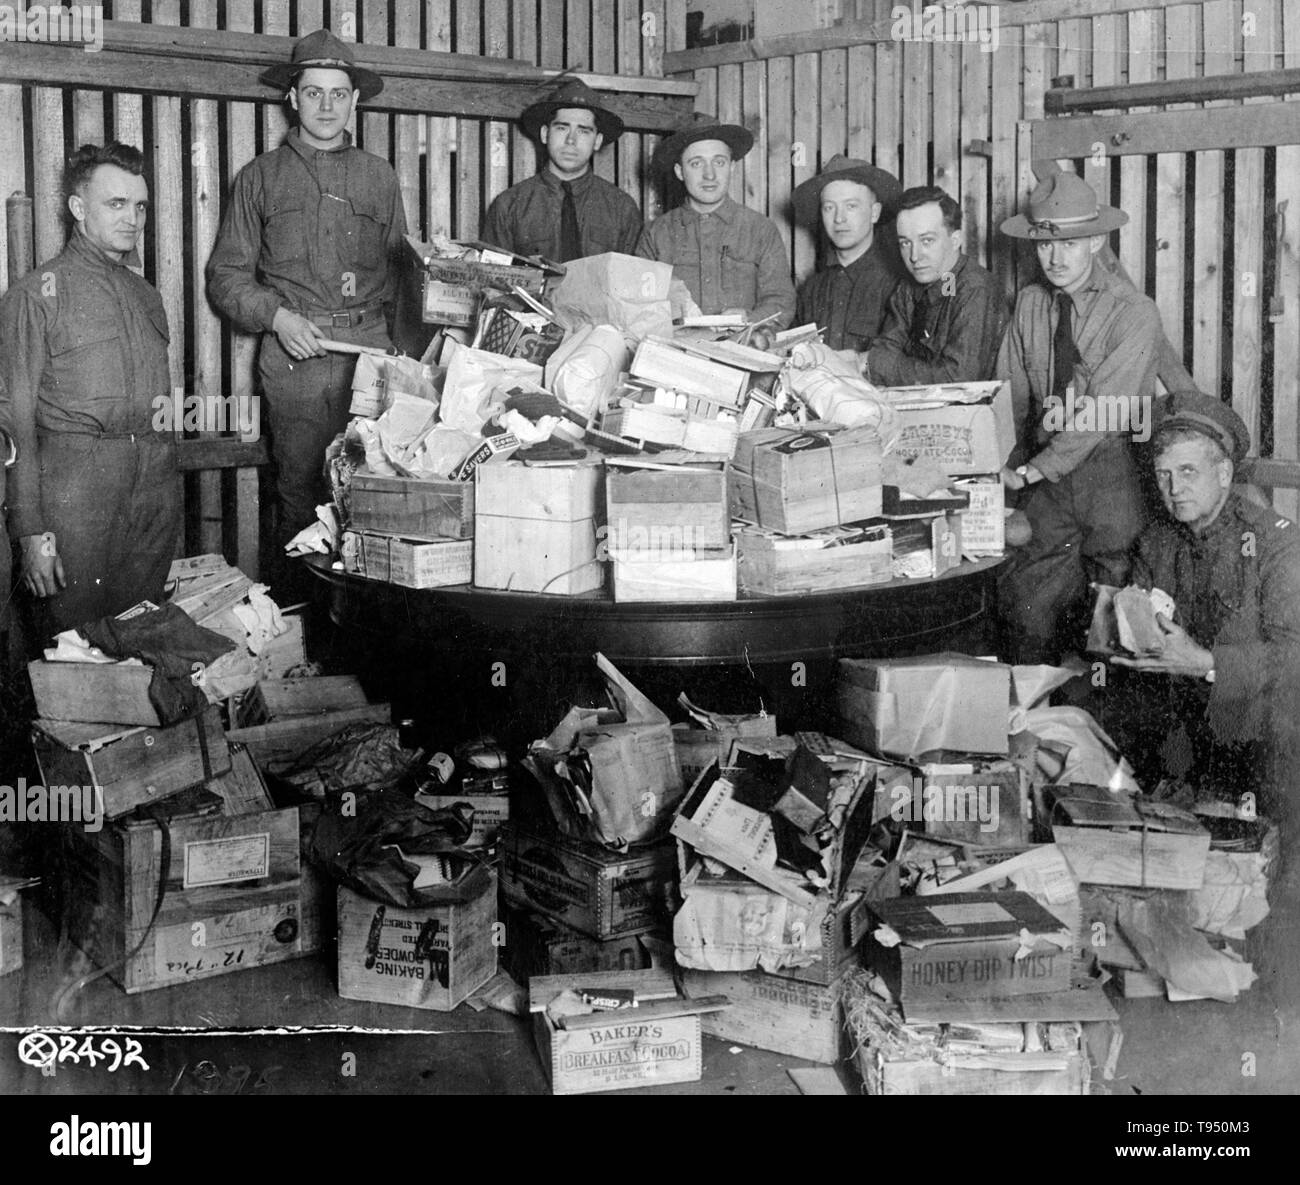 At the port of embarkation Army officers established a 'Christmas Box Hospital' for the repair of Christmas boxes received in the mails for shipment overseas to American soldiers in France. This photograph shows a pile of the damaged boxes awaiting inspection and repair. It was necessary to box anew about 11,000 christmas packages and many other packages were less seriously damaged in transit to the embarkation port. A total of 200,000 Christmas packages went to France from this country. Committee on Public Information, 1918. Stock Photo